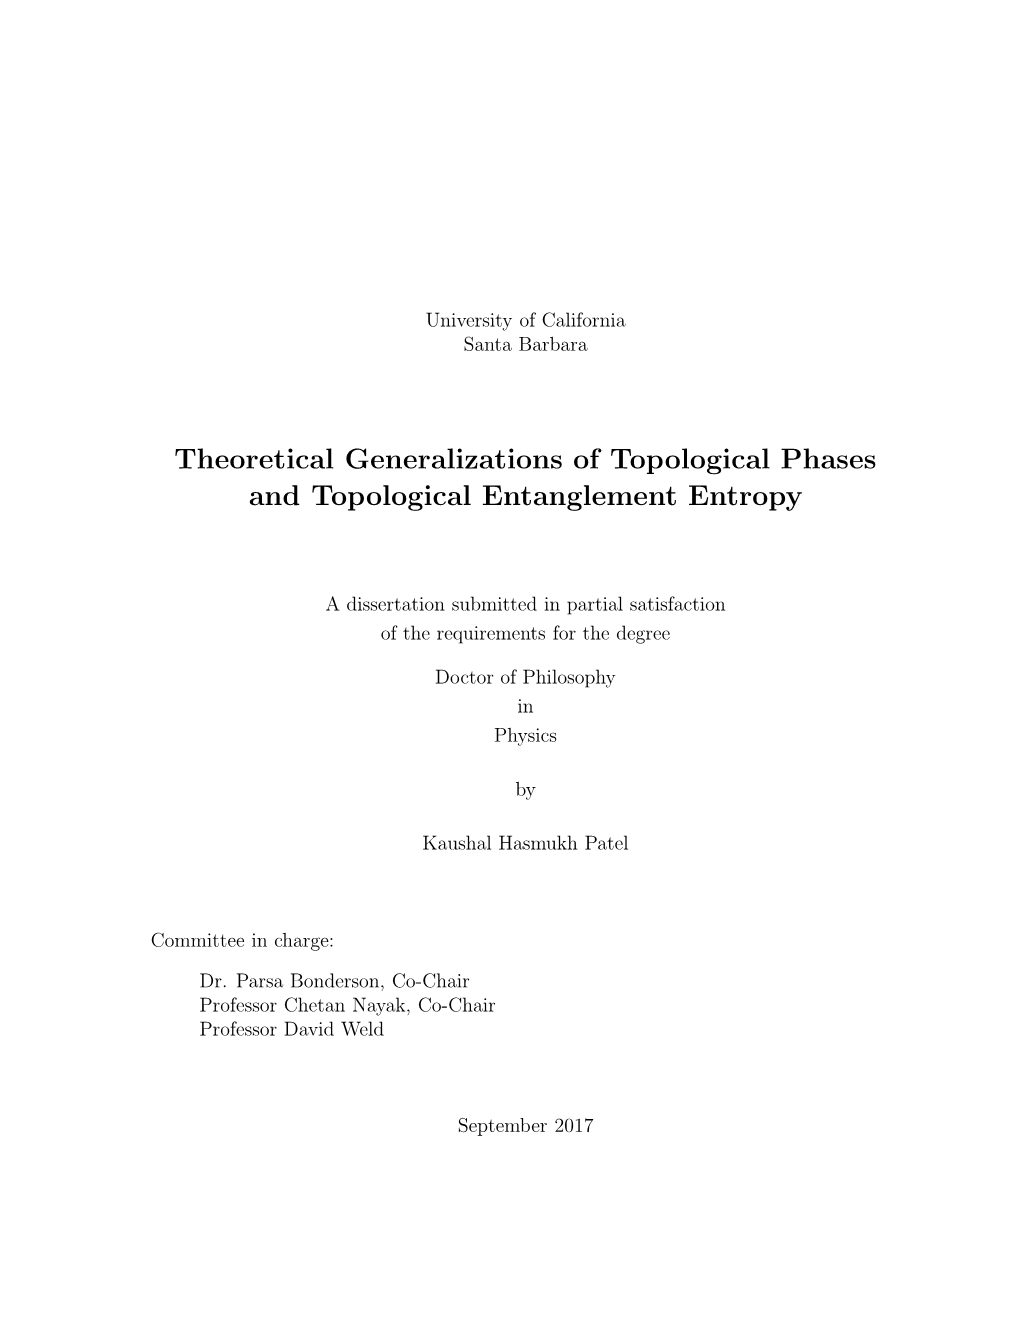 Theoretical Generalizations of Topological Phases and Topological Entanglement Entropy